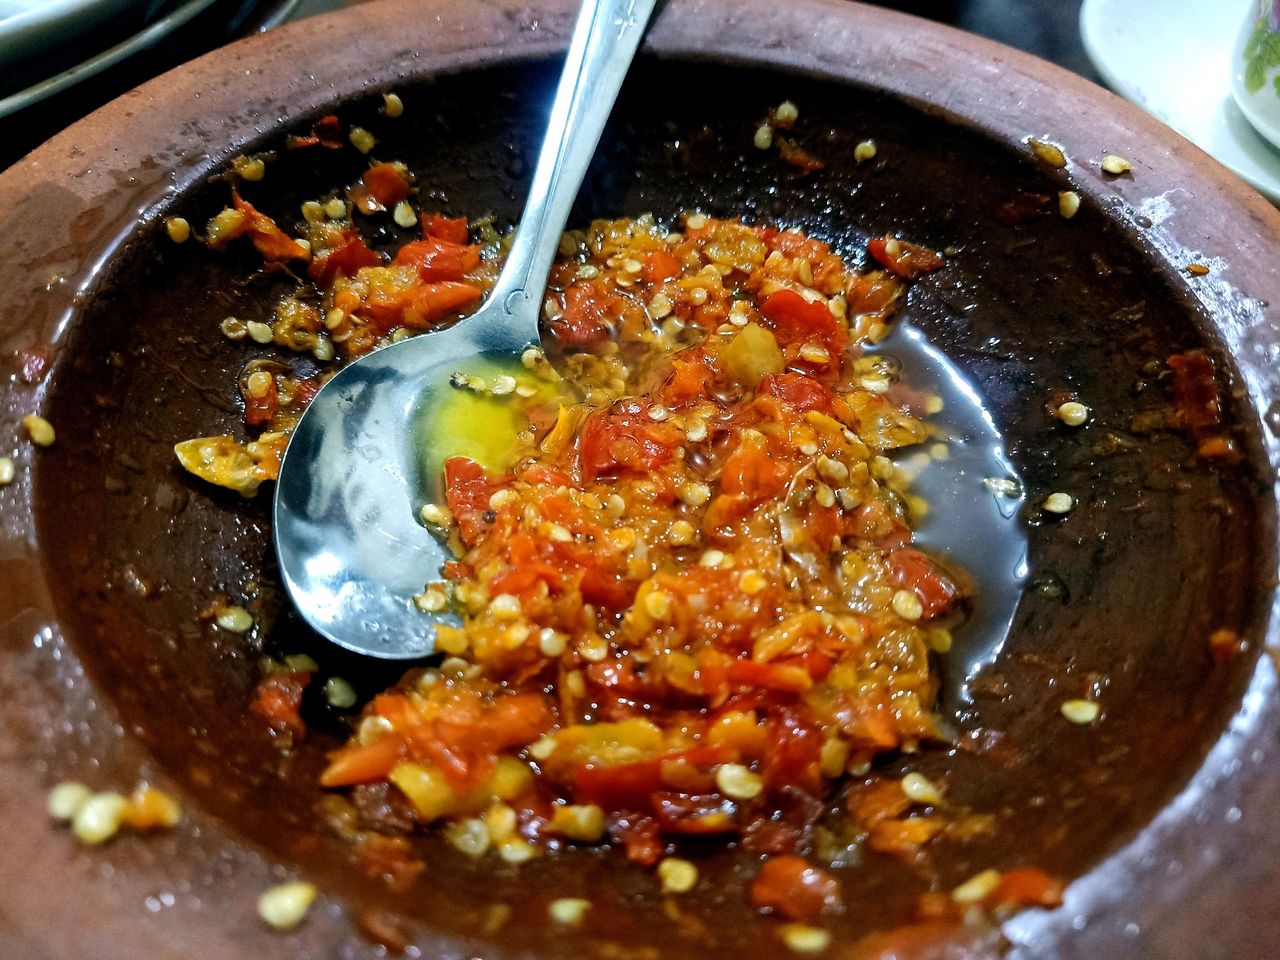 Boost your immunity with this homemade garlic and chili syrup: recipe and health benefits explained